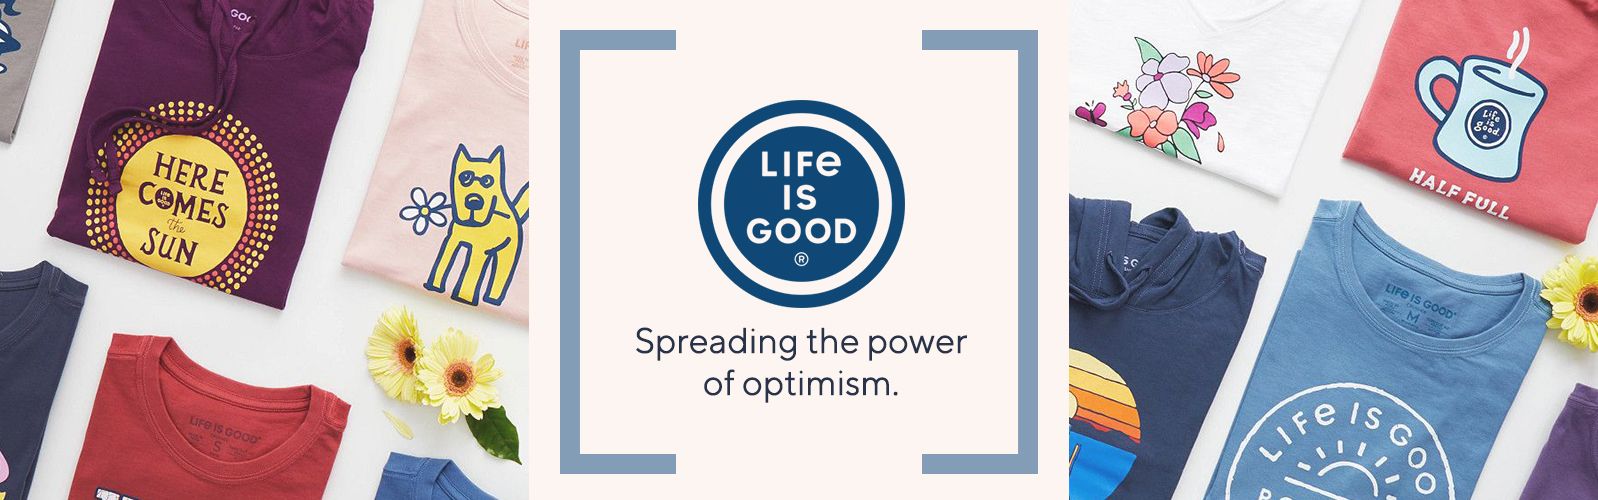 Life Is Good - Spreading the power of optimism.